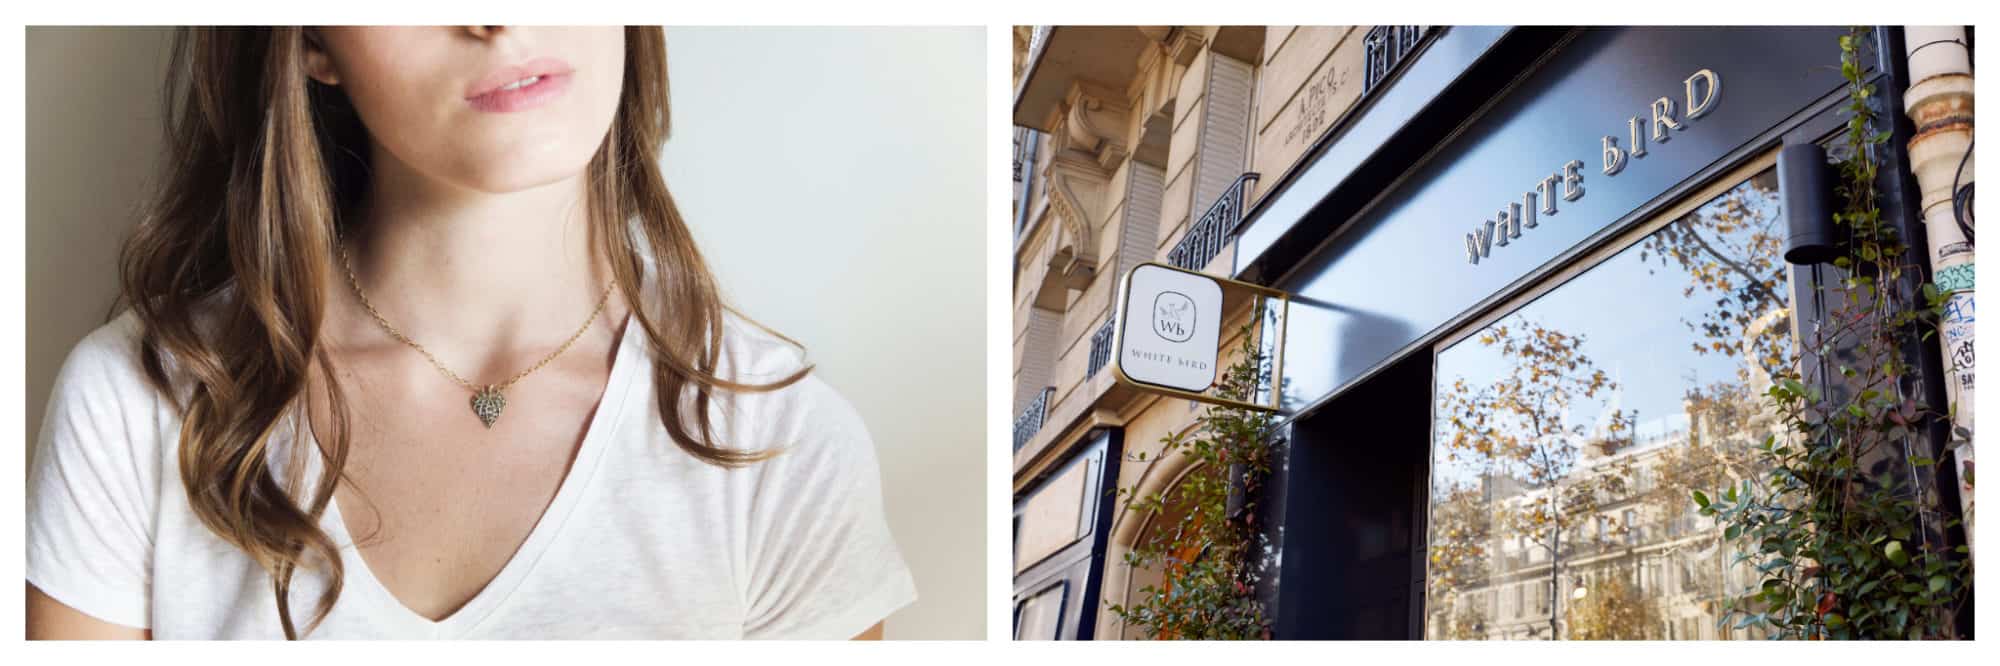 On left: A woman wears a simple jade-green pendant, strung on a gold chain. The jewelry comes from the internationally-curated collection of White Bird. On right: The White Bird storefront welcomes visitors at one of their three Paris locations, where shoppers can discover pieces created by independent jewelers.